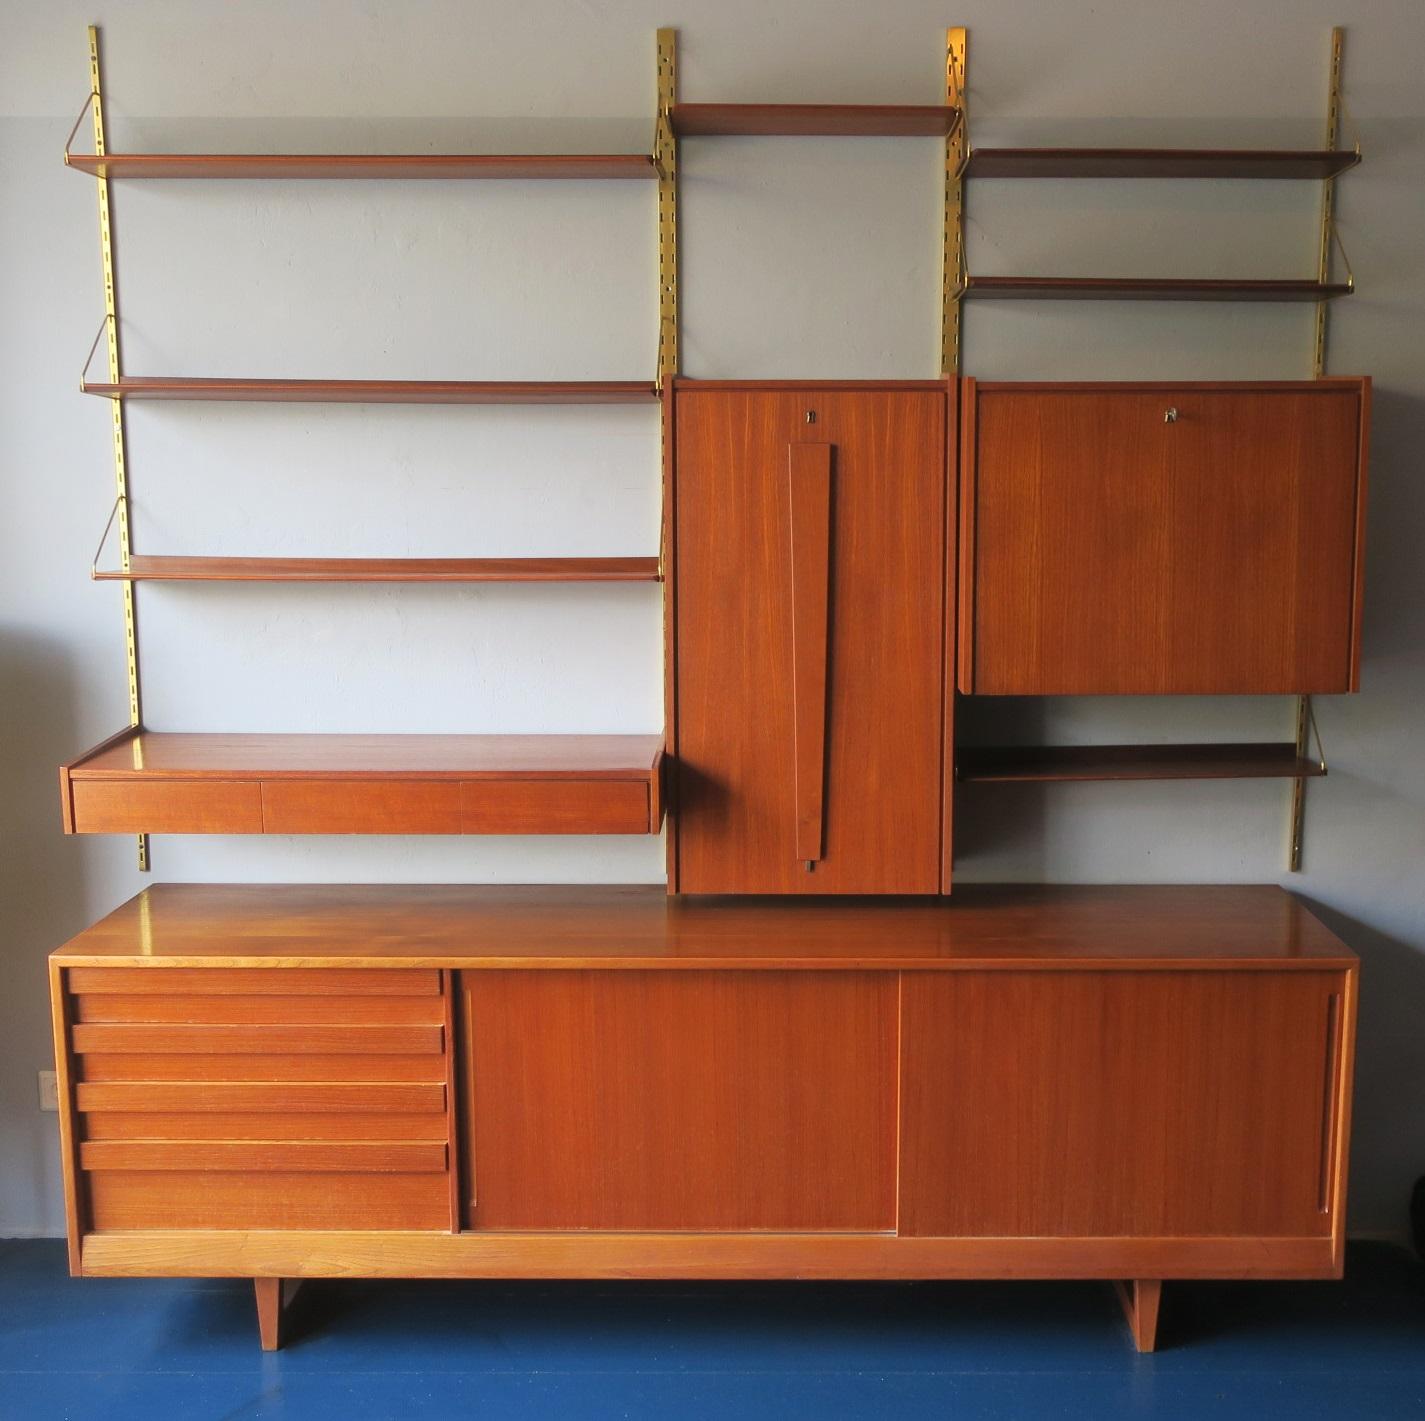 Midcentury teak modular wall shelf system with a matching low sideboard; drop-down desk revealing an ebonized and mirrored interior with small shelves when opened, with its original green-papered back; a set of 3 hanging drawers; mirrored cupboard